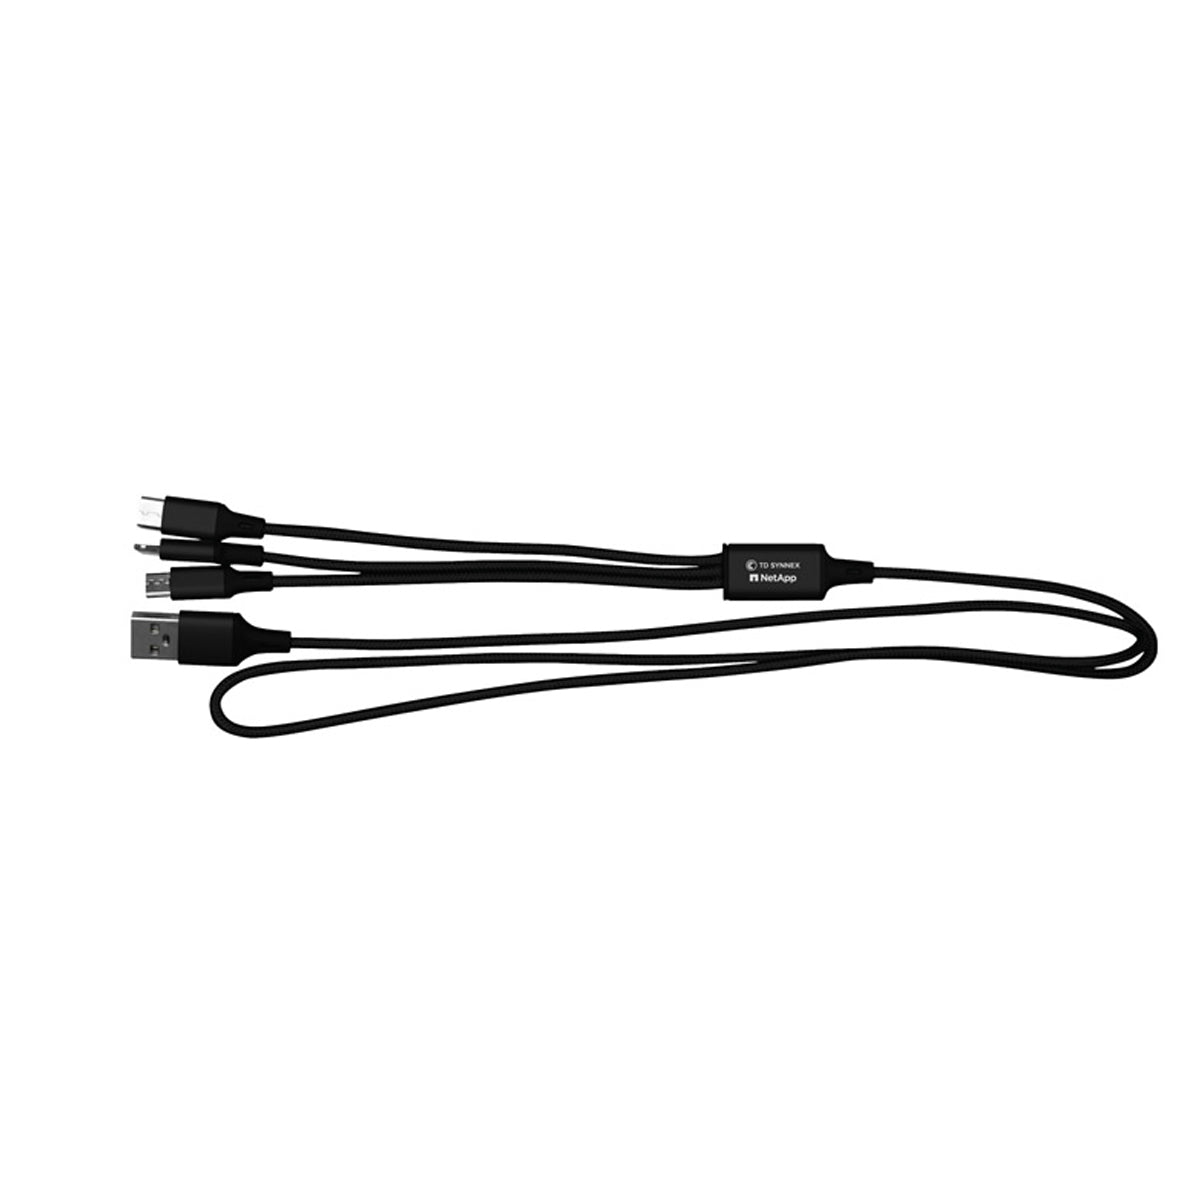 3" Metallic 3-in-1 Cable with Type C USB - TD Synnex + NetApp